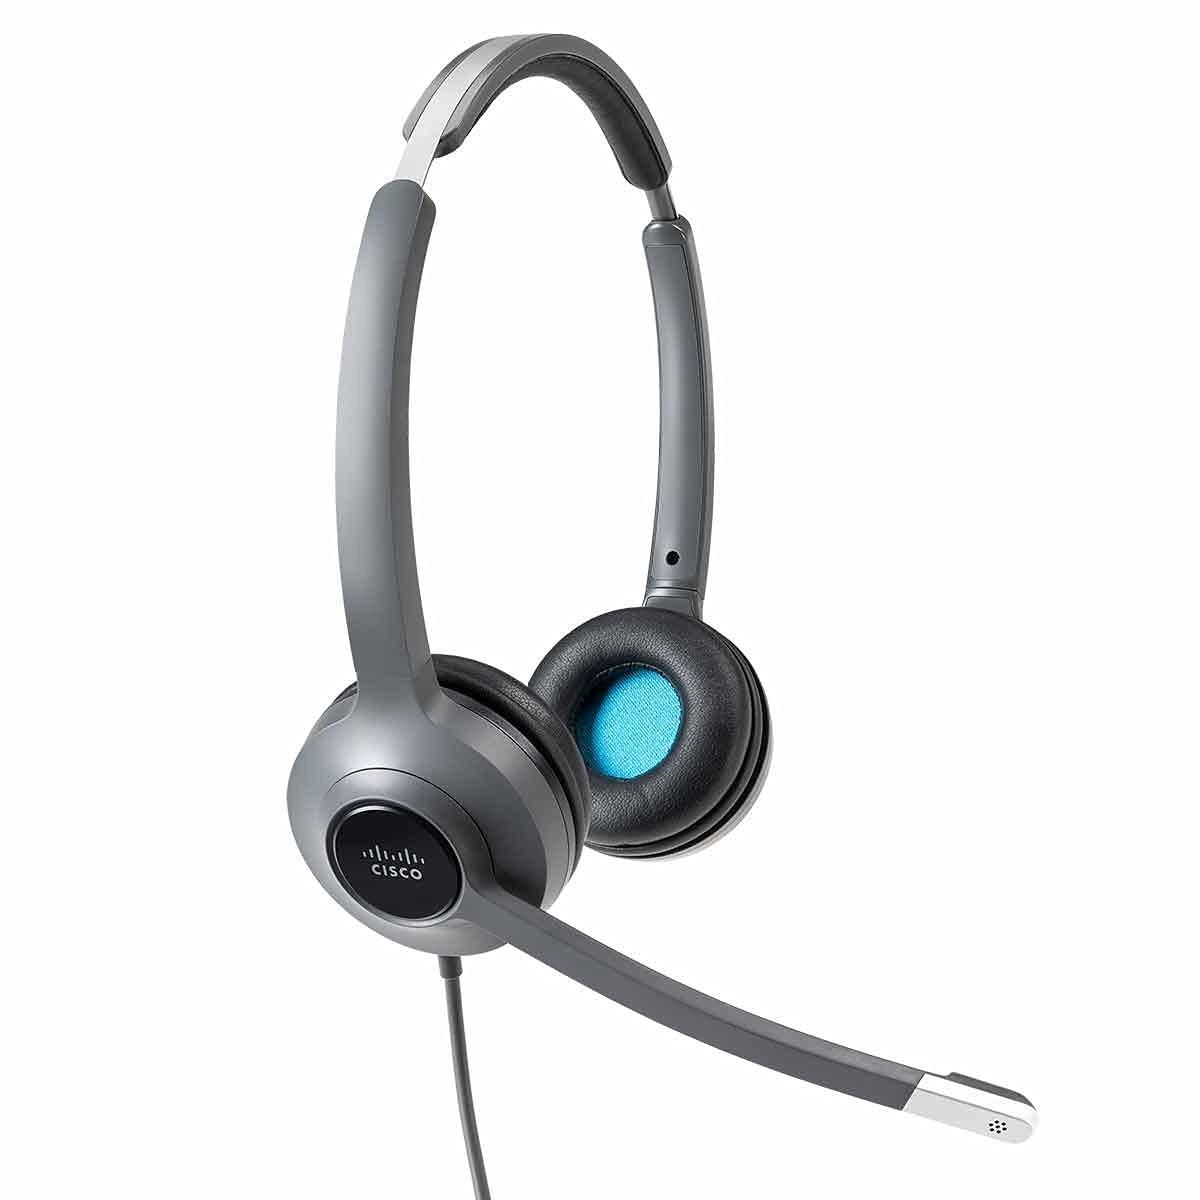 HEADSET 522 WIRED DUAL 3.5MM